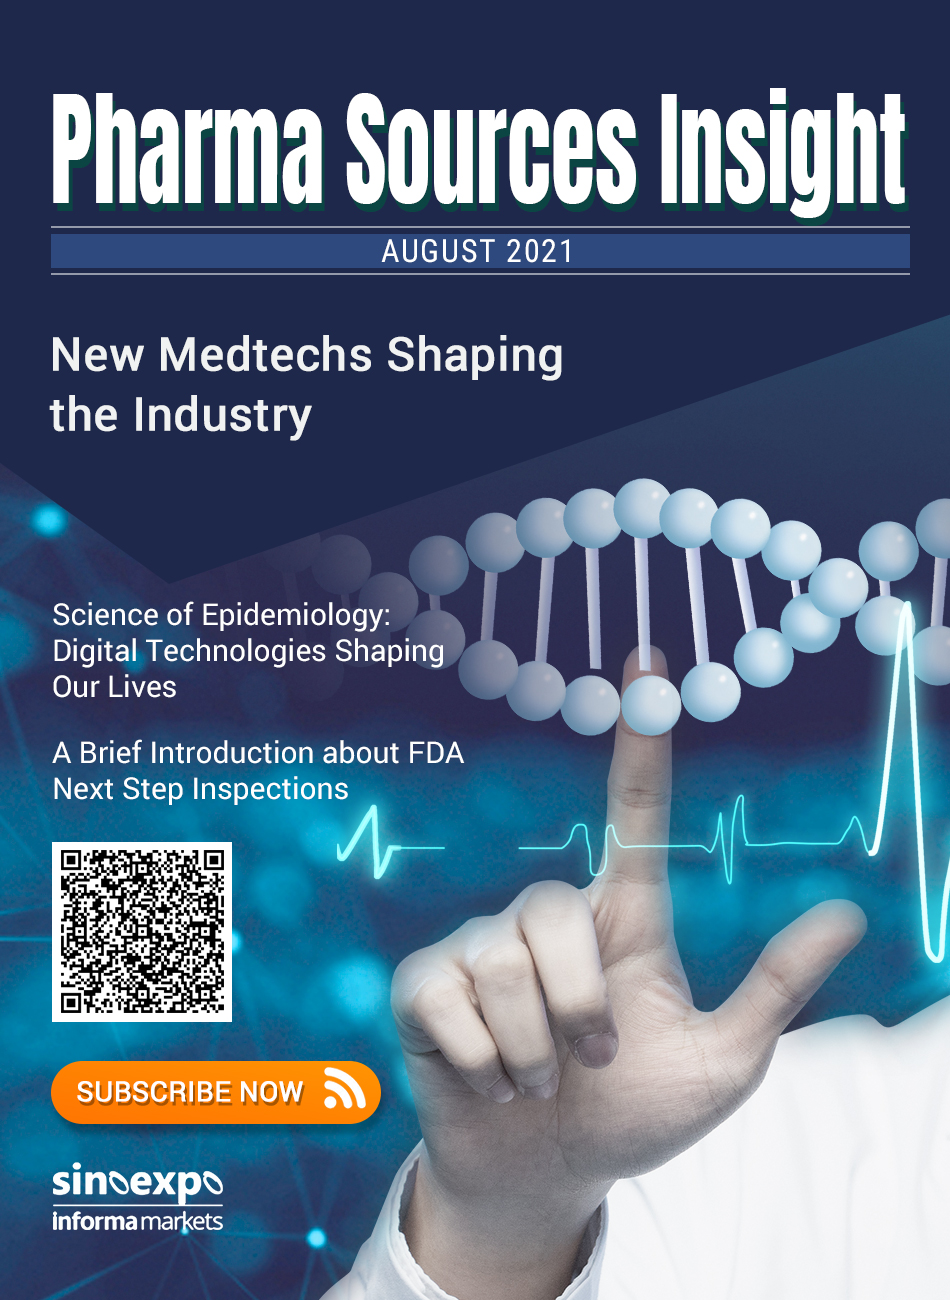 Pharma Sources Insight August 2021 - From the Editor